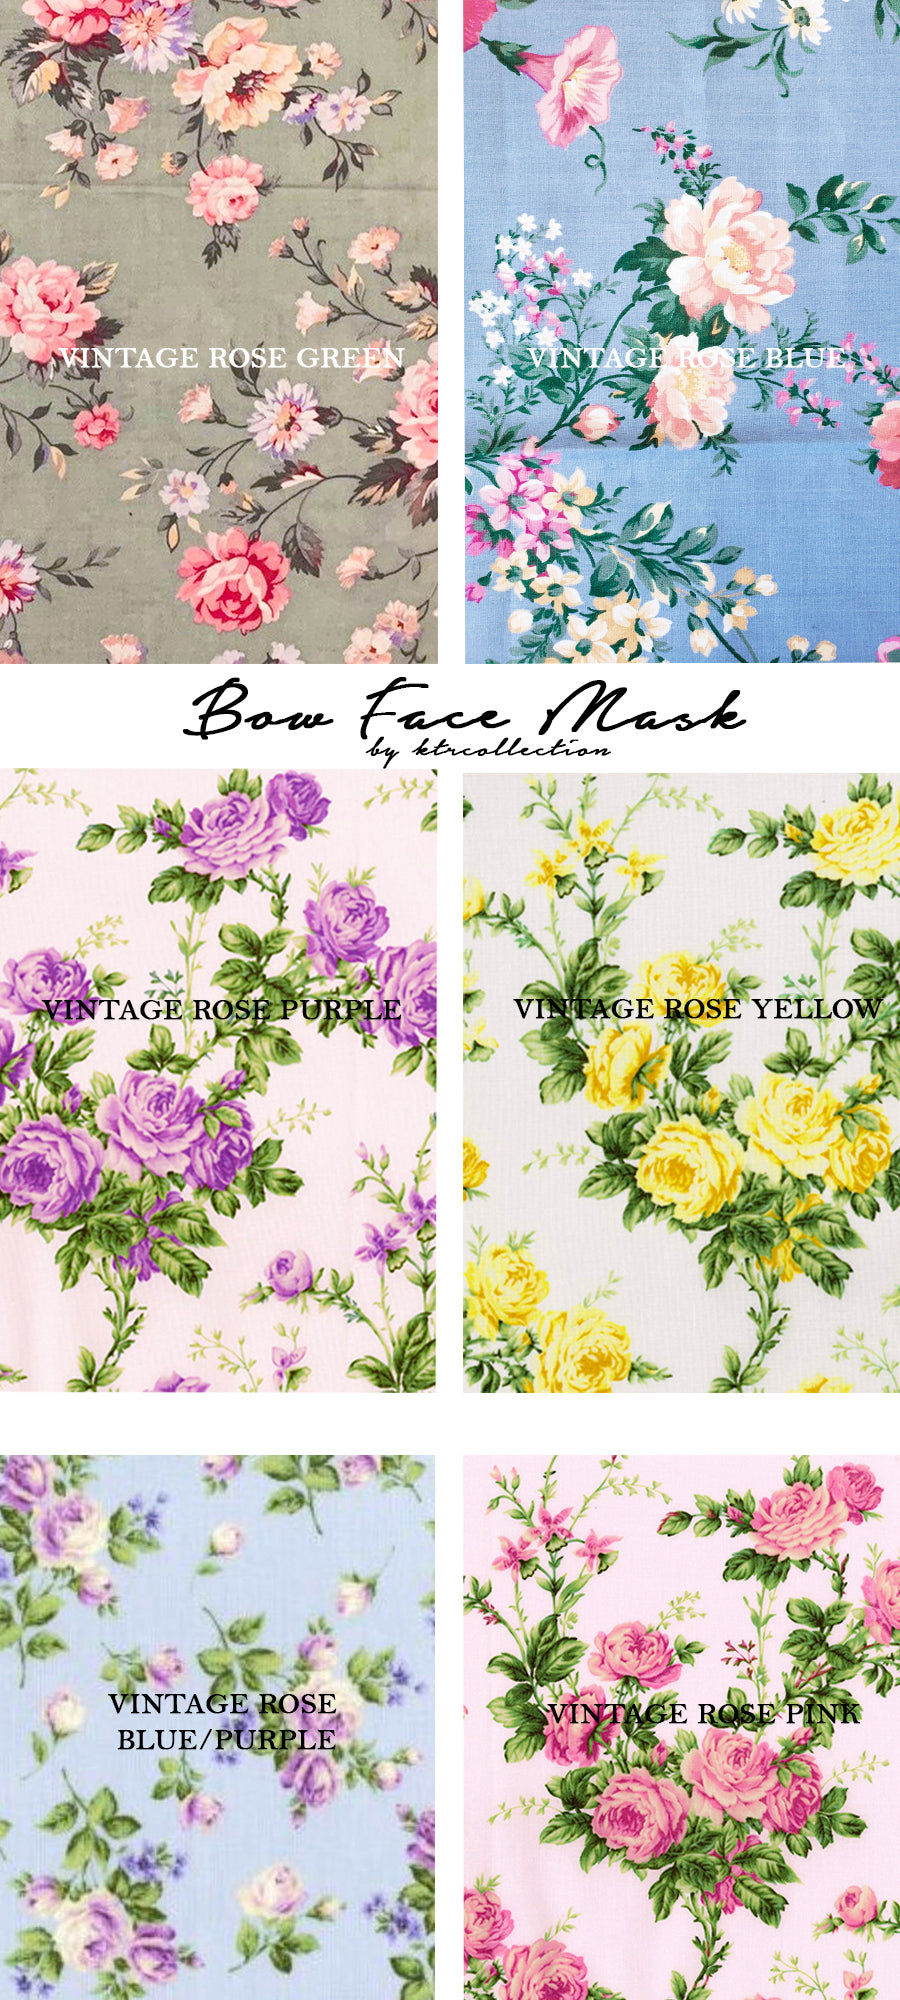 Floral Bow Face Mask